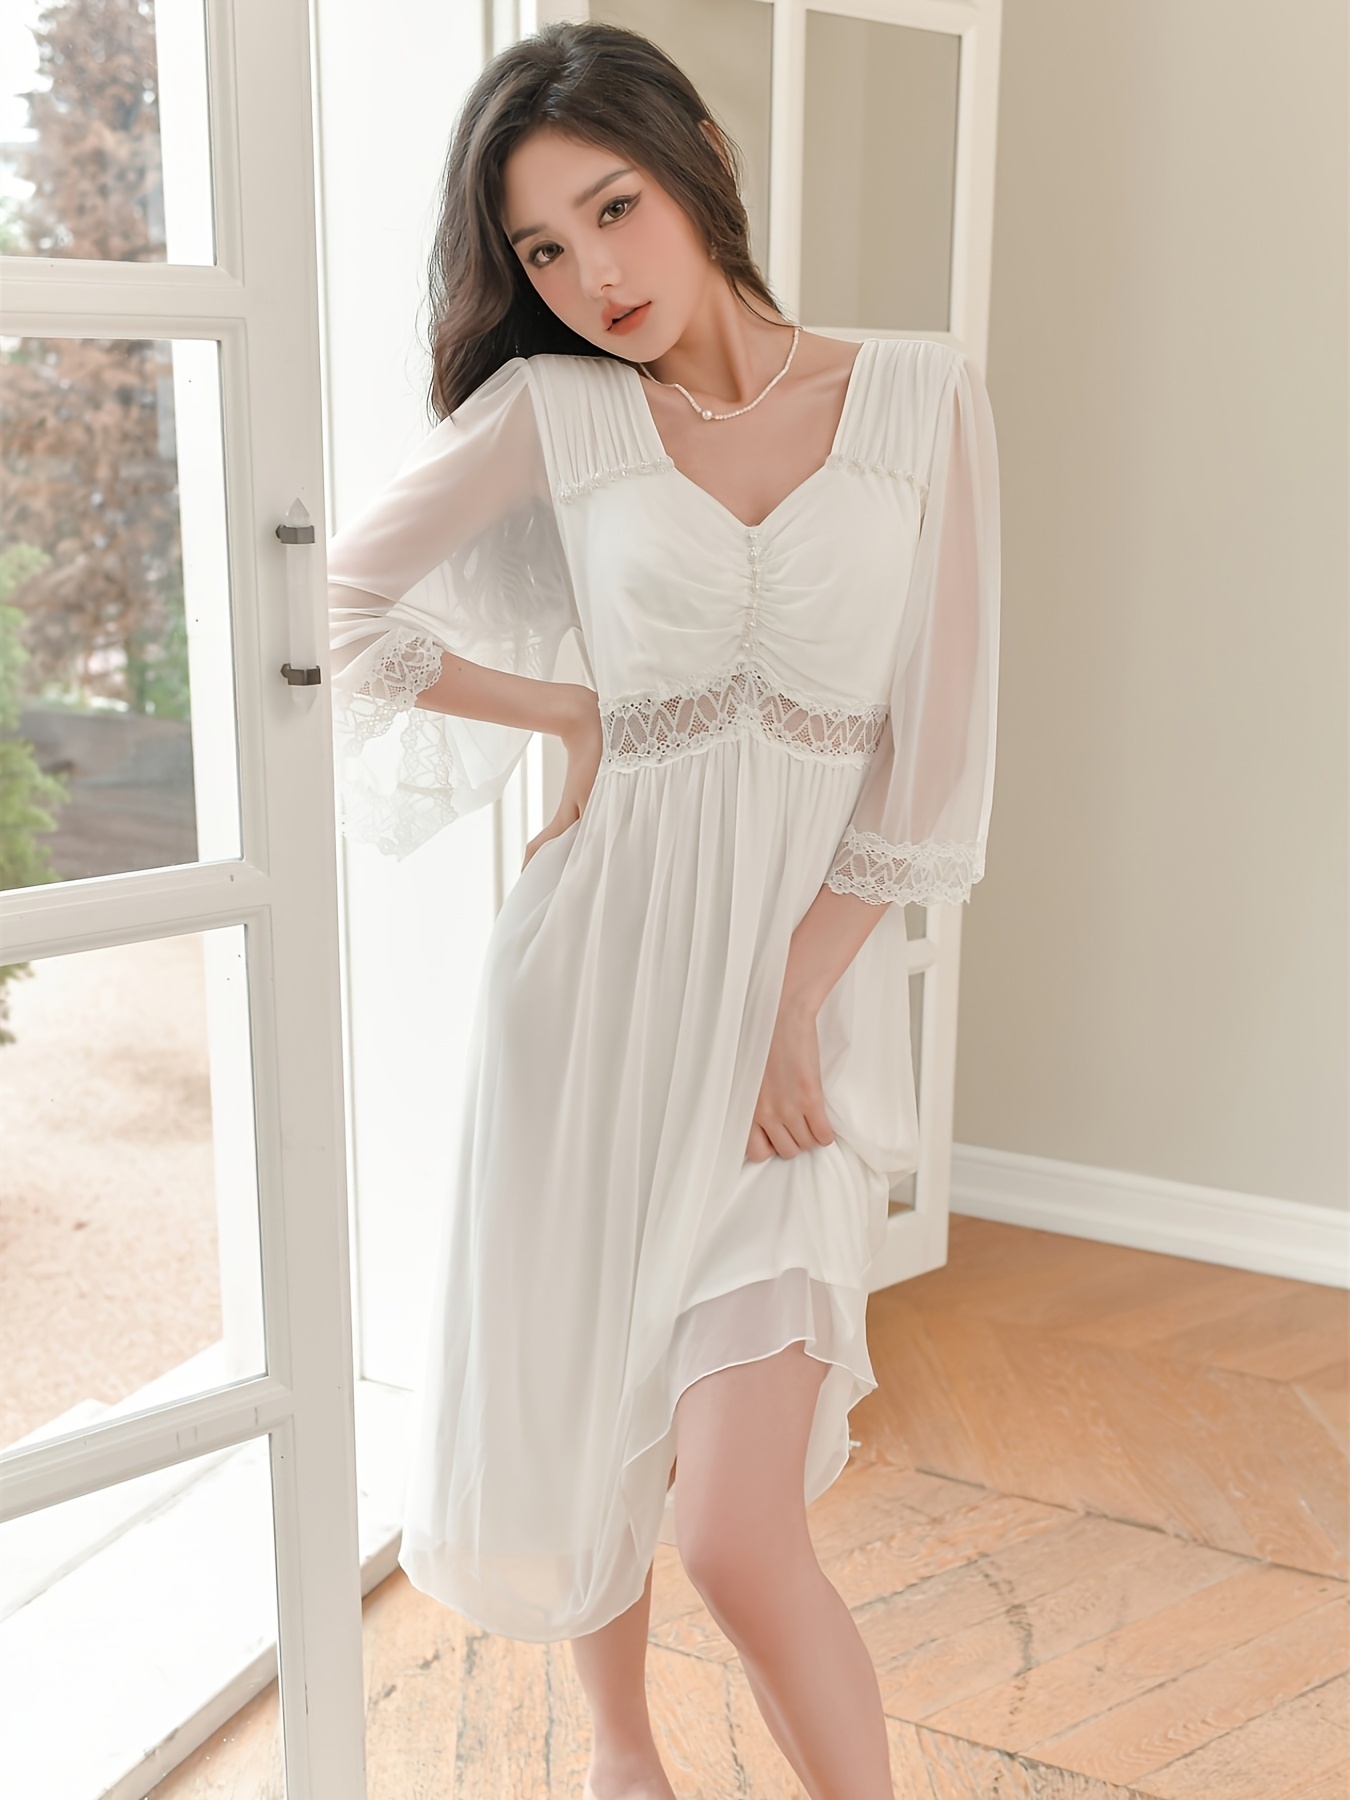 Long nightgown, see-through mesh, lace inlay